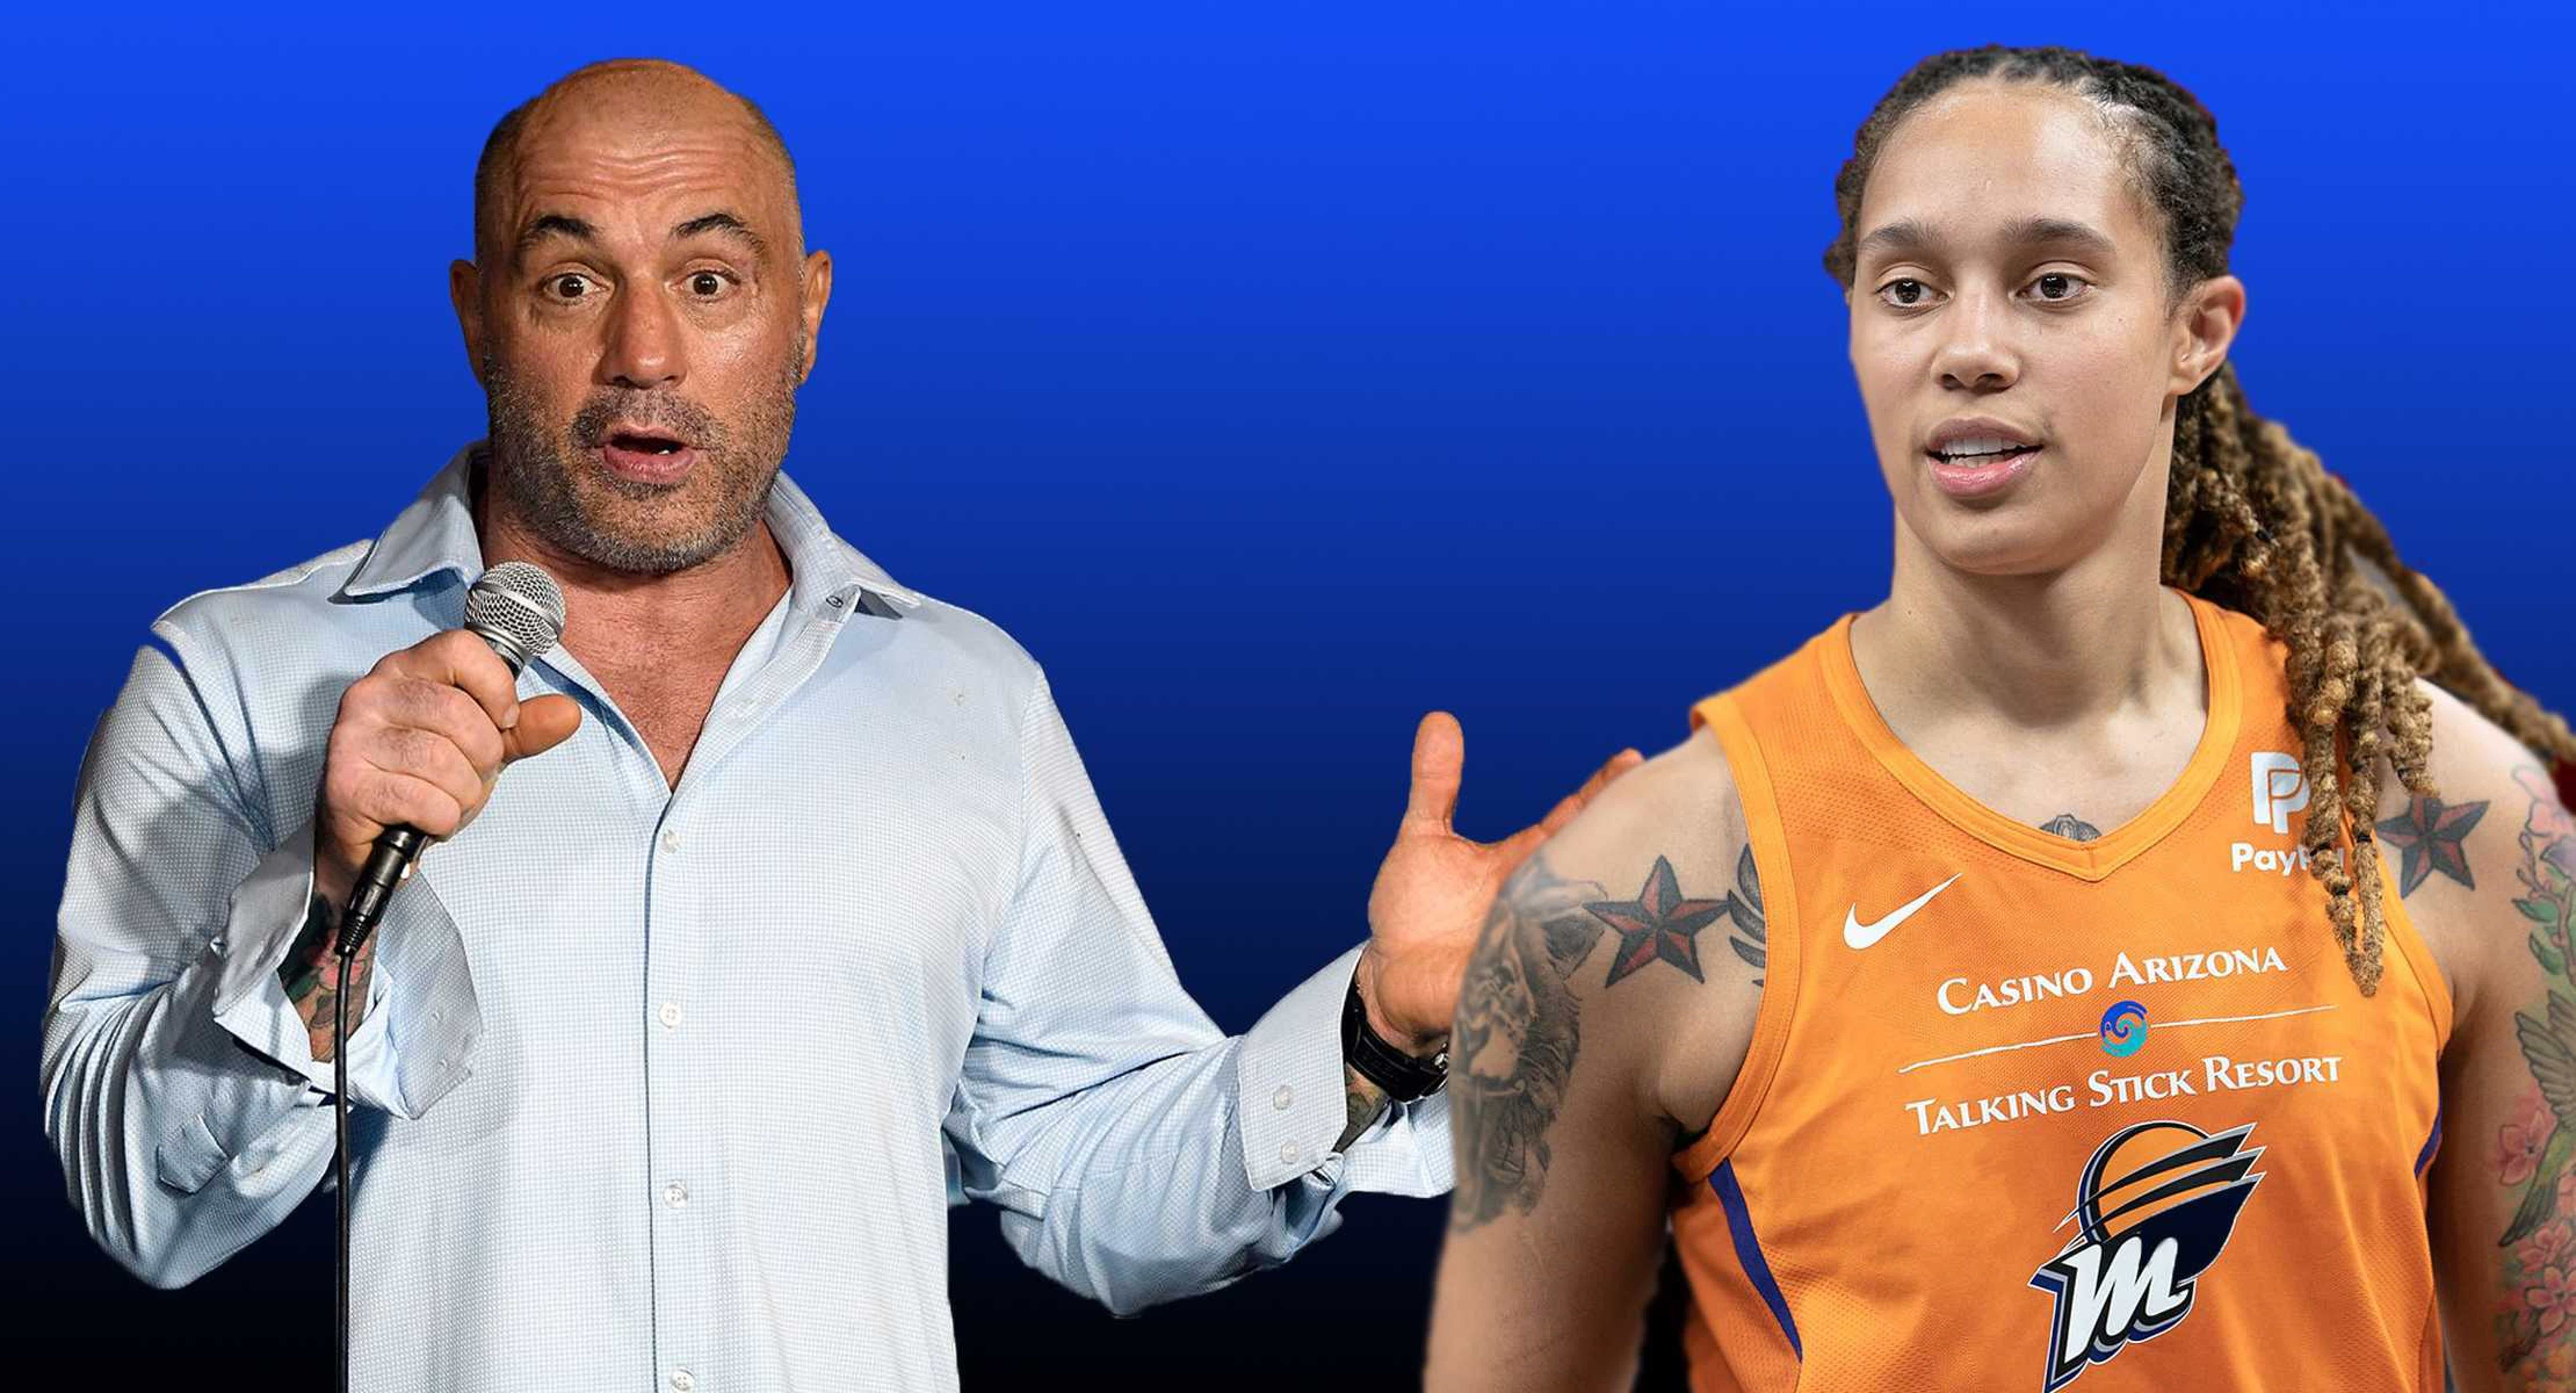 Joe Rogan: &#39;No One Should Be In Jail For Weed,&#39; Calls Brittney Griner&#39;s Russian Imprisonment &#39;Horrific&#39;